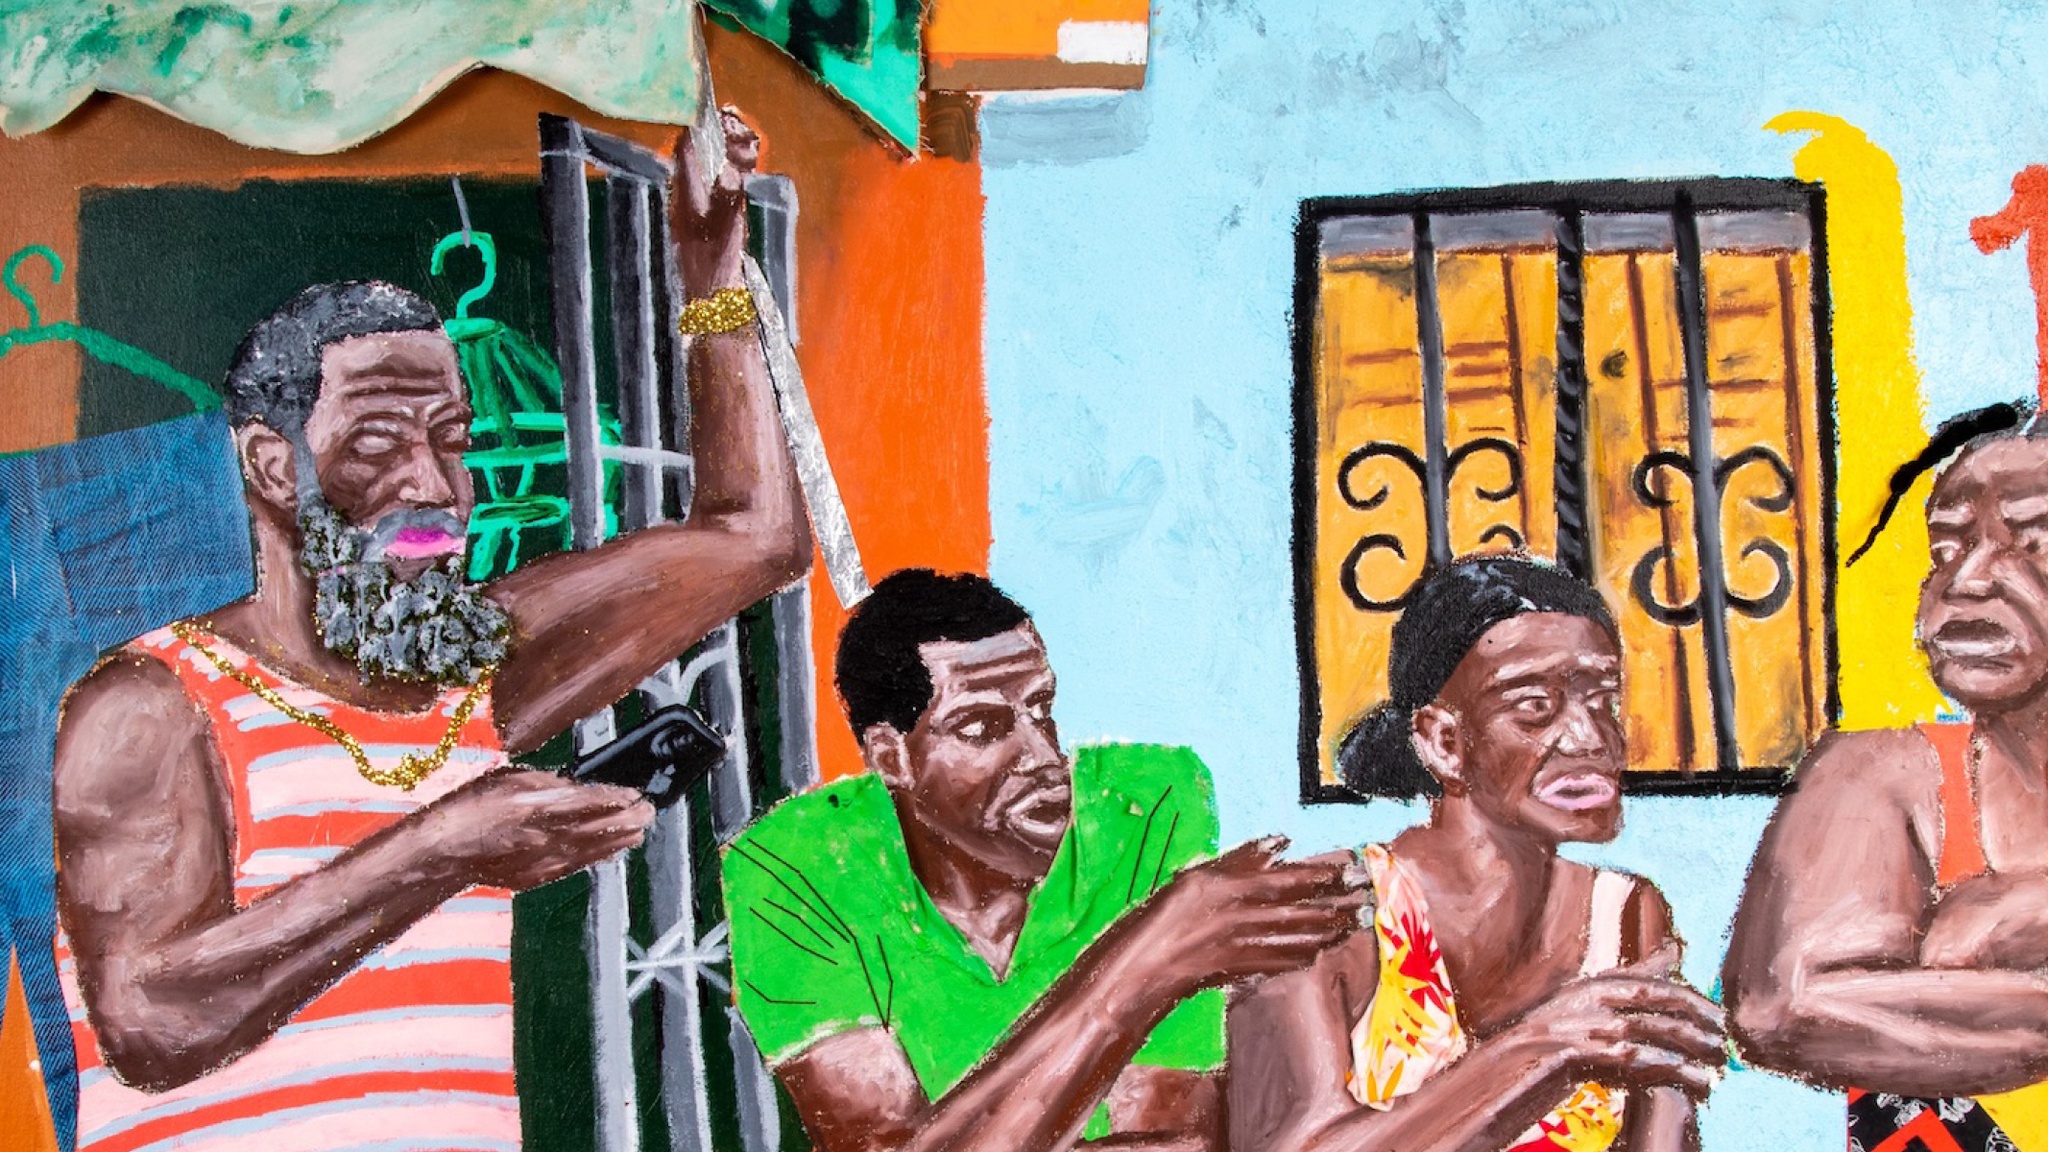 A painting that includes collaged mixed media elements like fabric depicts four Black Dominican folks standing outside a low, one-story building with a light blue and orange façade. The figures are lined up in a row along the facade. The two central figures seem to lean and sit on an orange wall. The figure on the left, a man with a beard wearing an orange striped tank top, holds a phone that he looks down at. A woman on the far right wears a skirt with a geometric pattern of lozenge shapes in blue, black, red, and yellow. She crosses her arms.